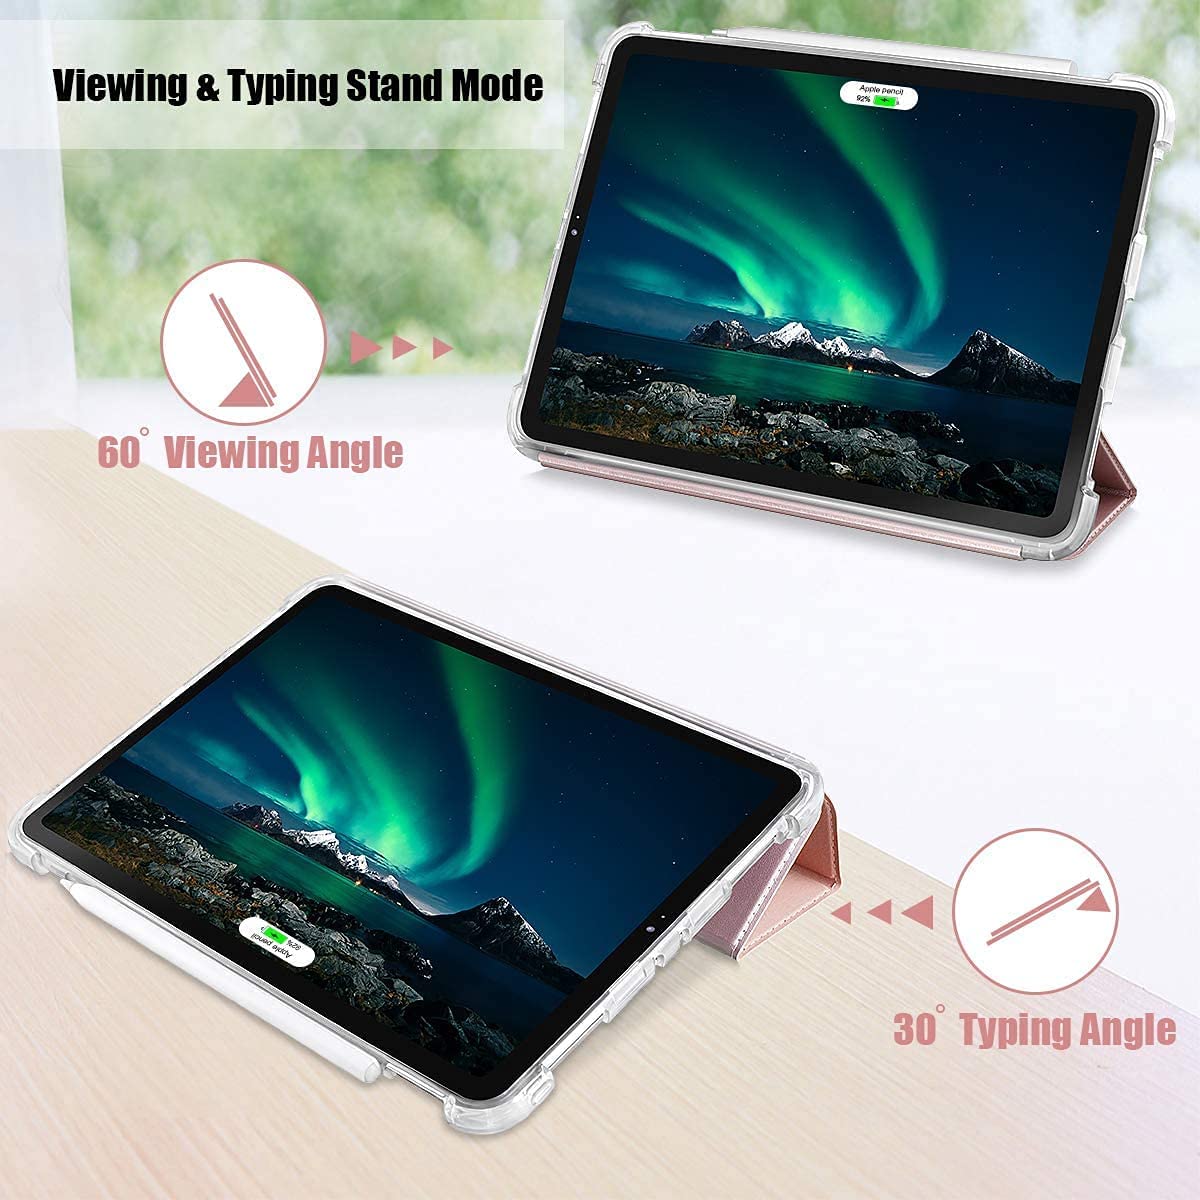 Translucent Frosted Smart Folio Stand Cover for iPad Pro 11 Case 2021/2020/2018，Support Apple Pencil 2 Charging